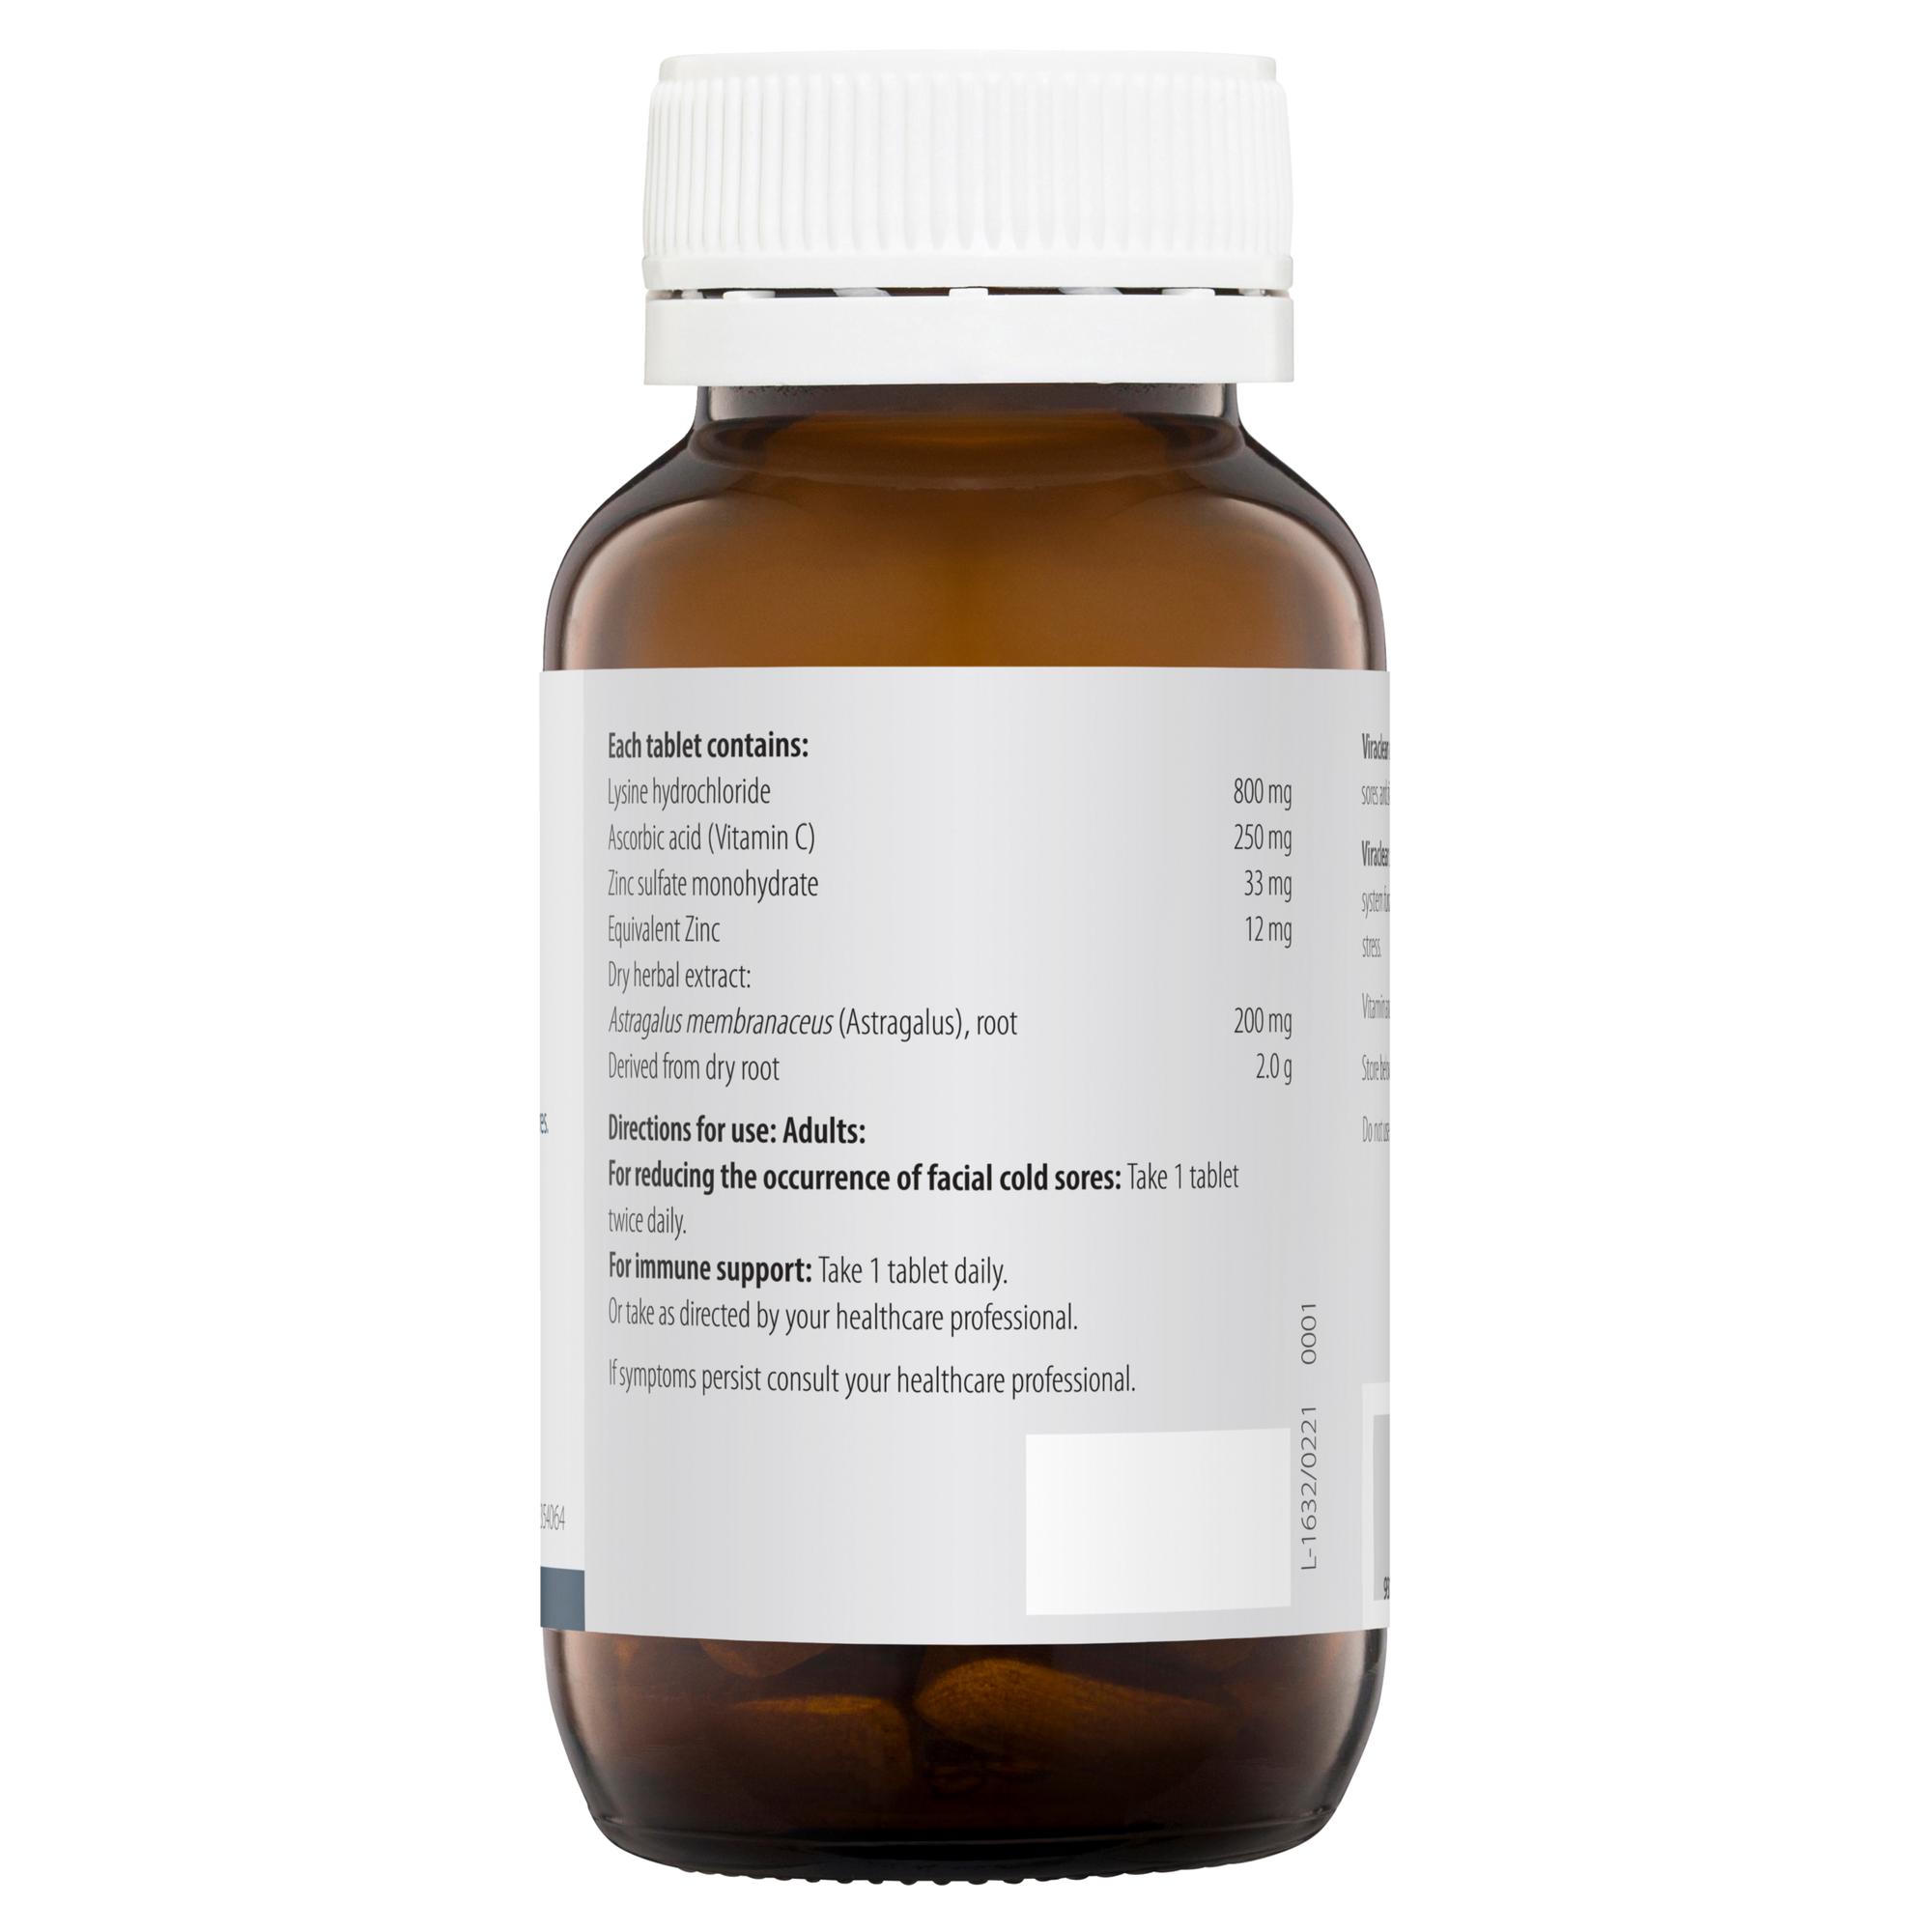 Metagenics Viraclear 60 Tablets